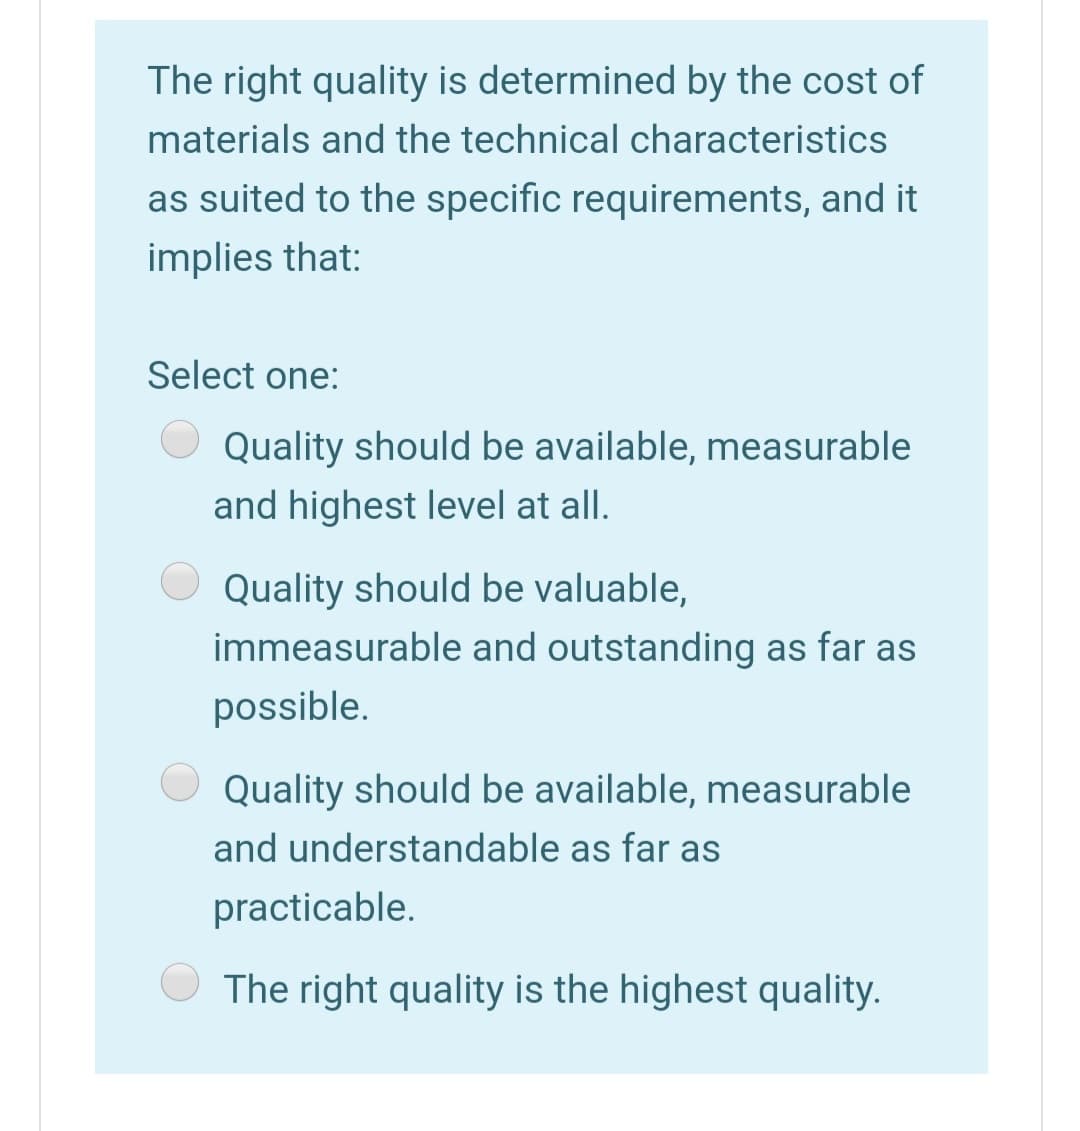 The right quality is determined by the cost of
materials and the technical characteristics
as suited to the specific requirements, and it
implies that:
Select one:
Quality should be available, measurable
and highest level at all.
Quality should be valuable,
immeasurable and outstanding as far as
possible.
Quality should be available, measurable
and understandable as far as
practicable.
The right quality is the highest quality.
